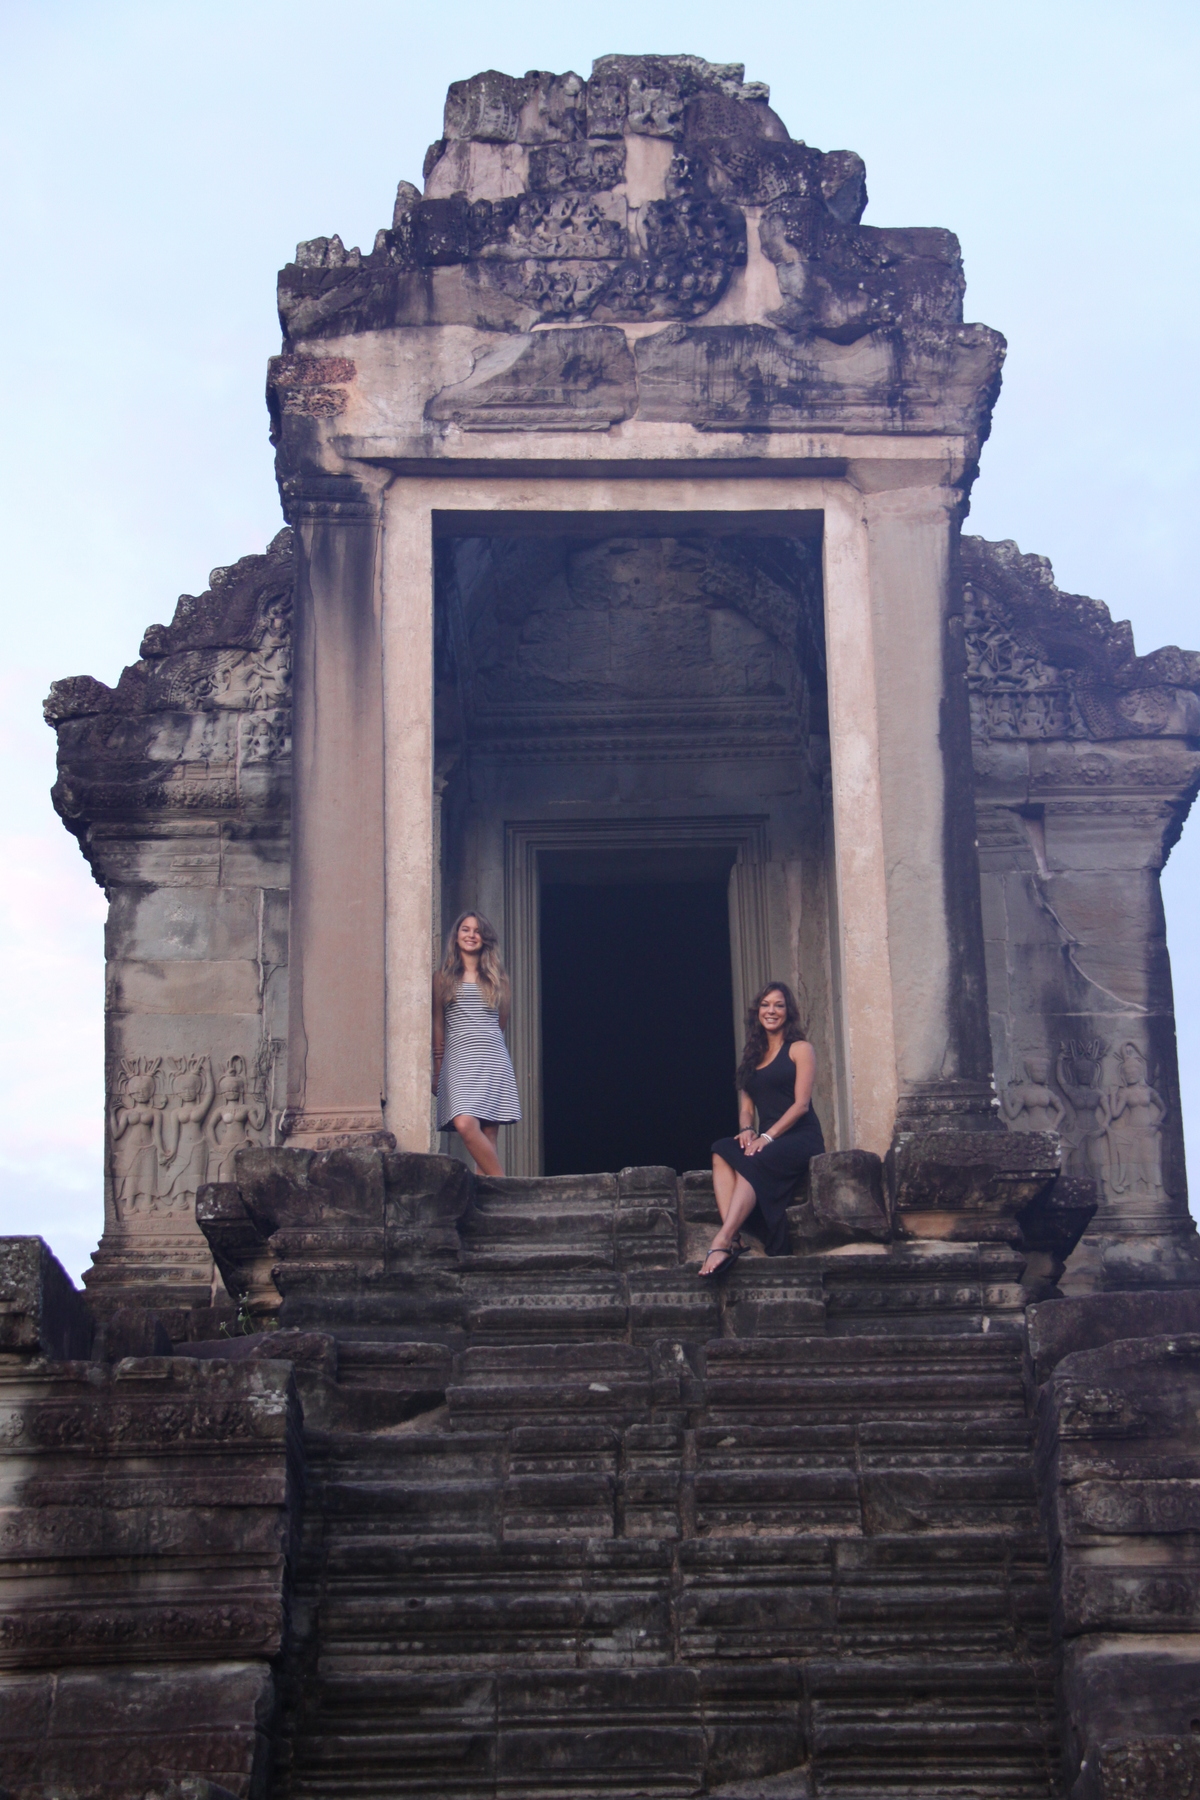 Looking for a Last Minute Exotic Holiday Trip? Cambodia!